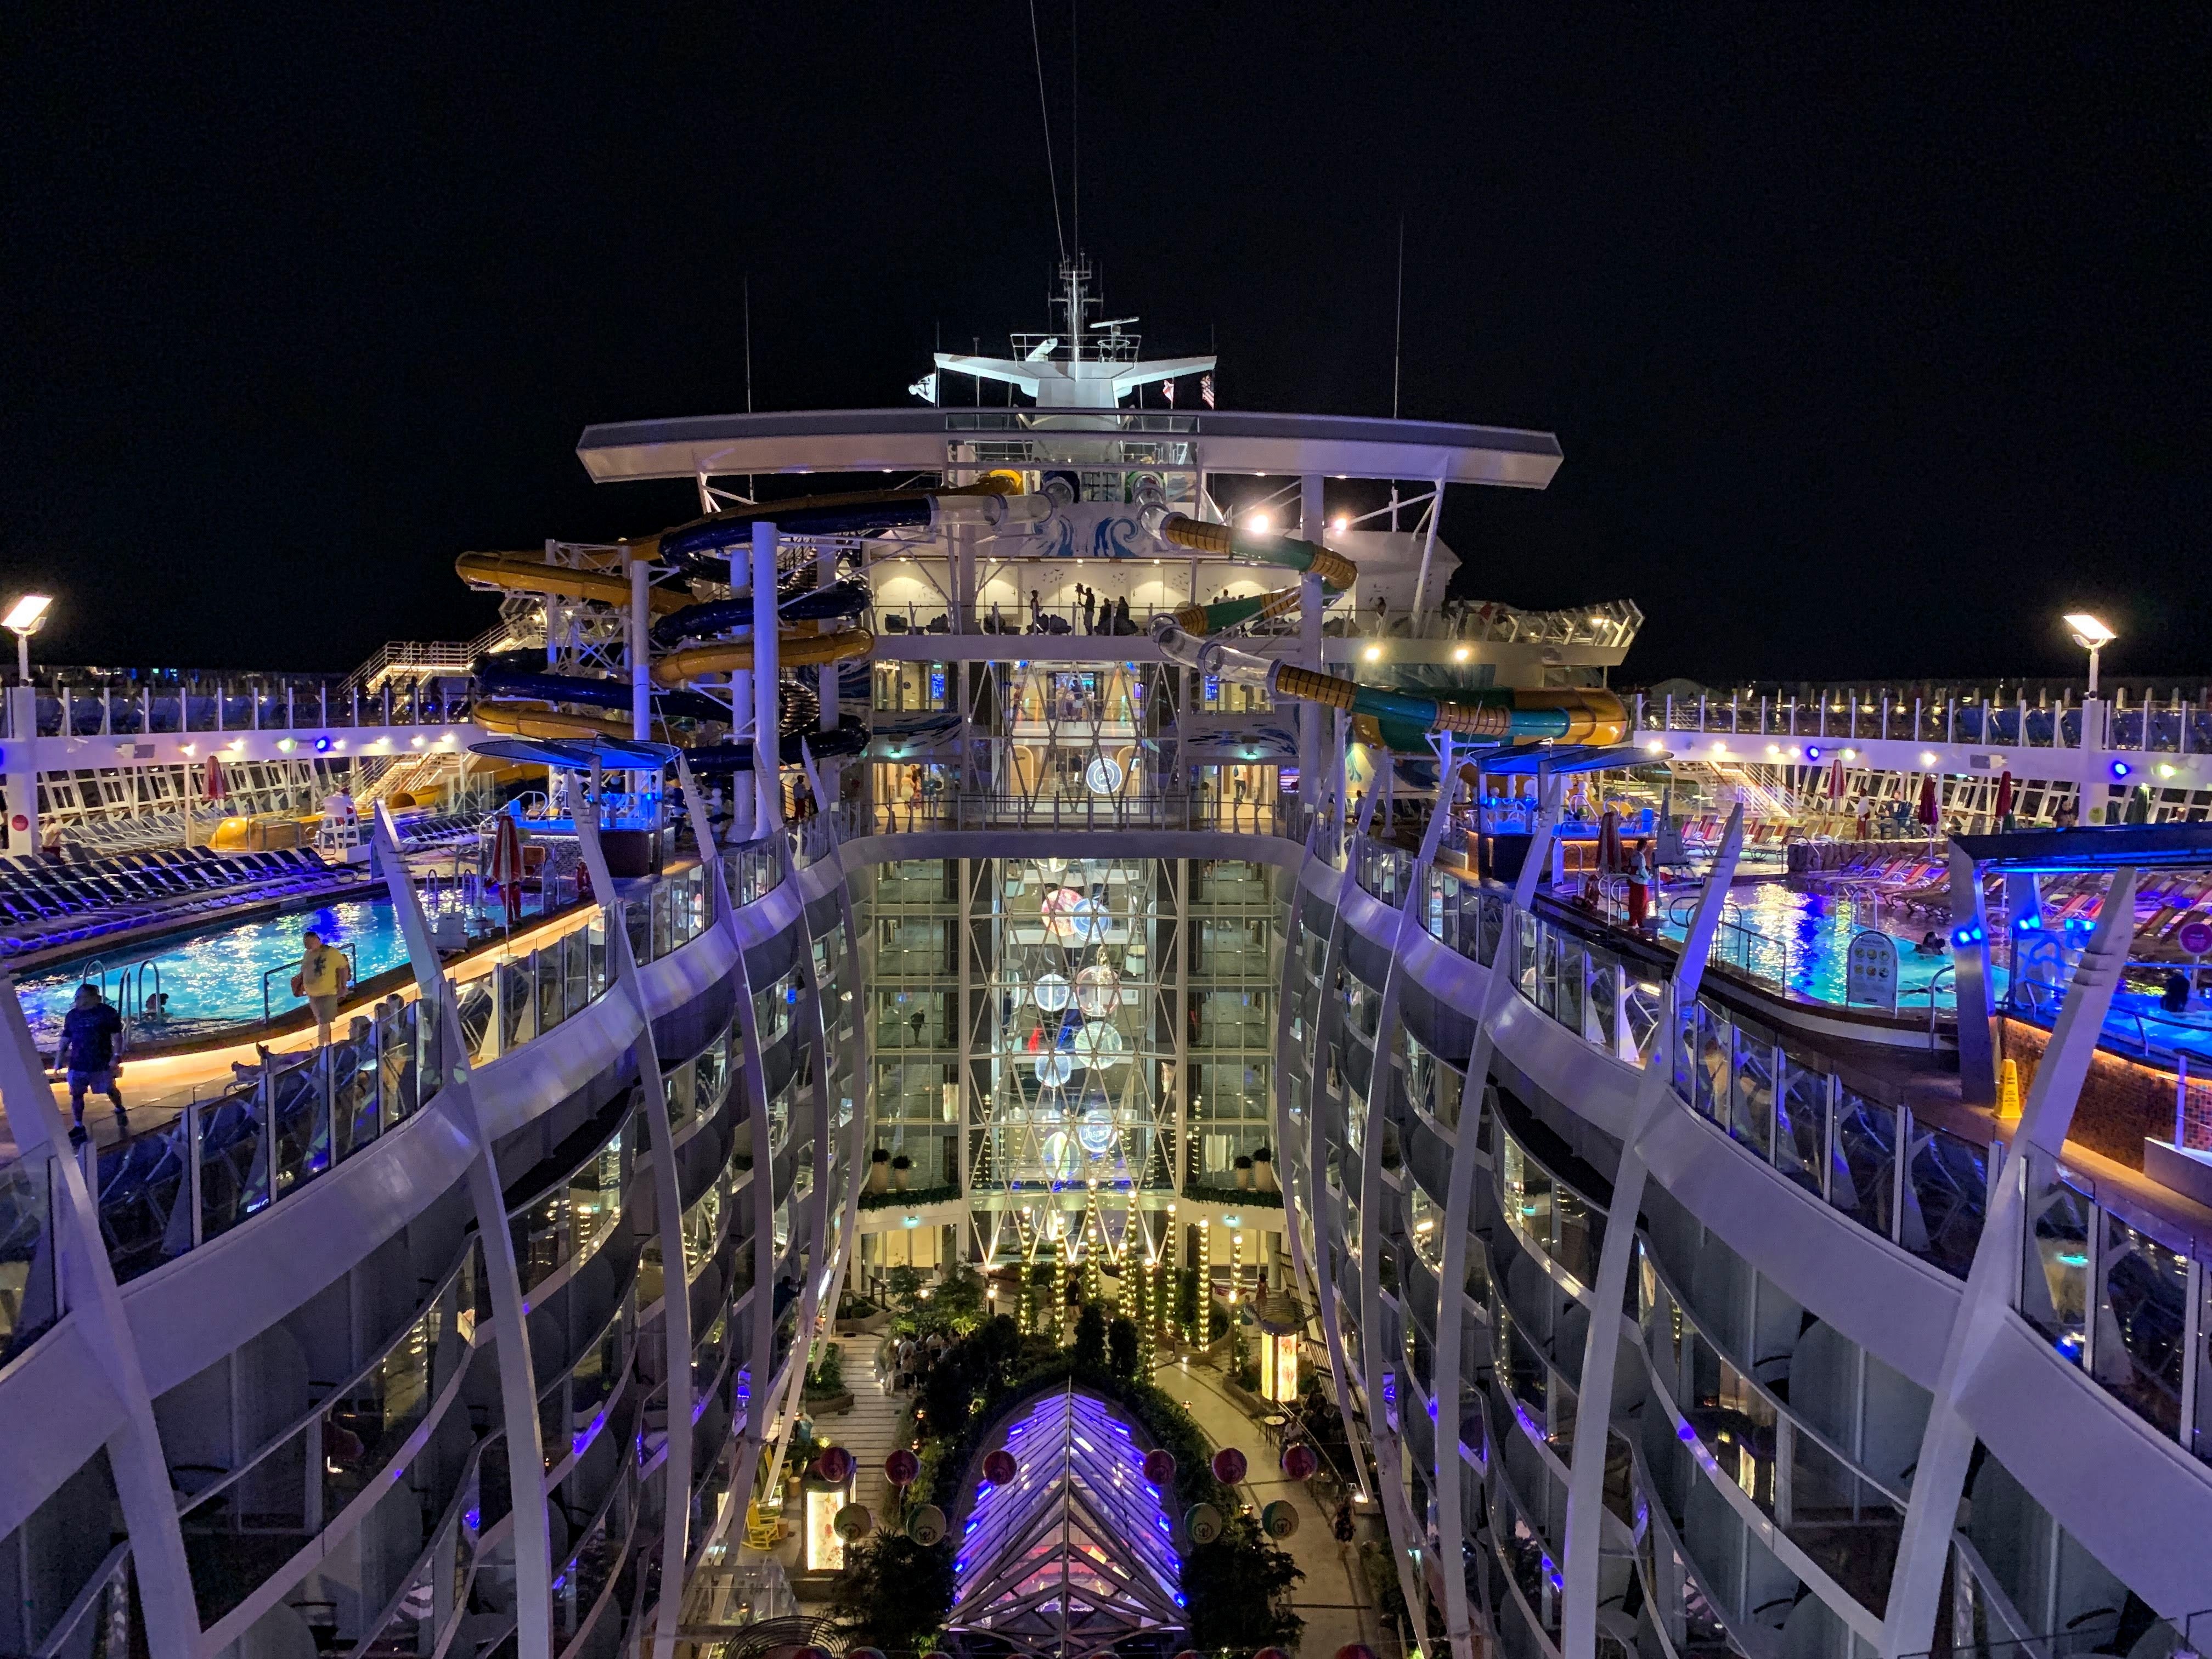 Royal Caribbean Announces What's Likely Another RecordBreaking Cruise